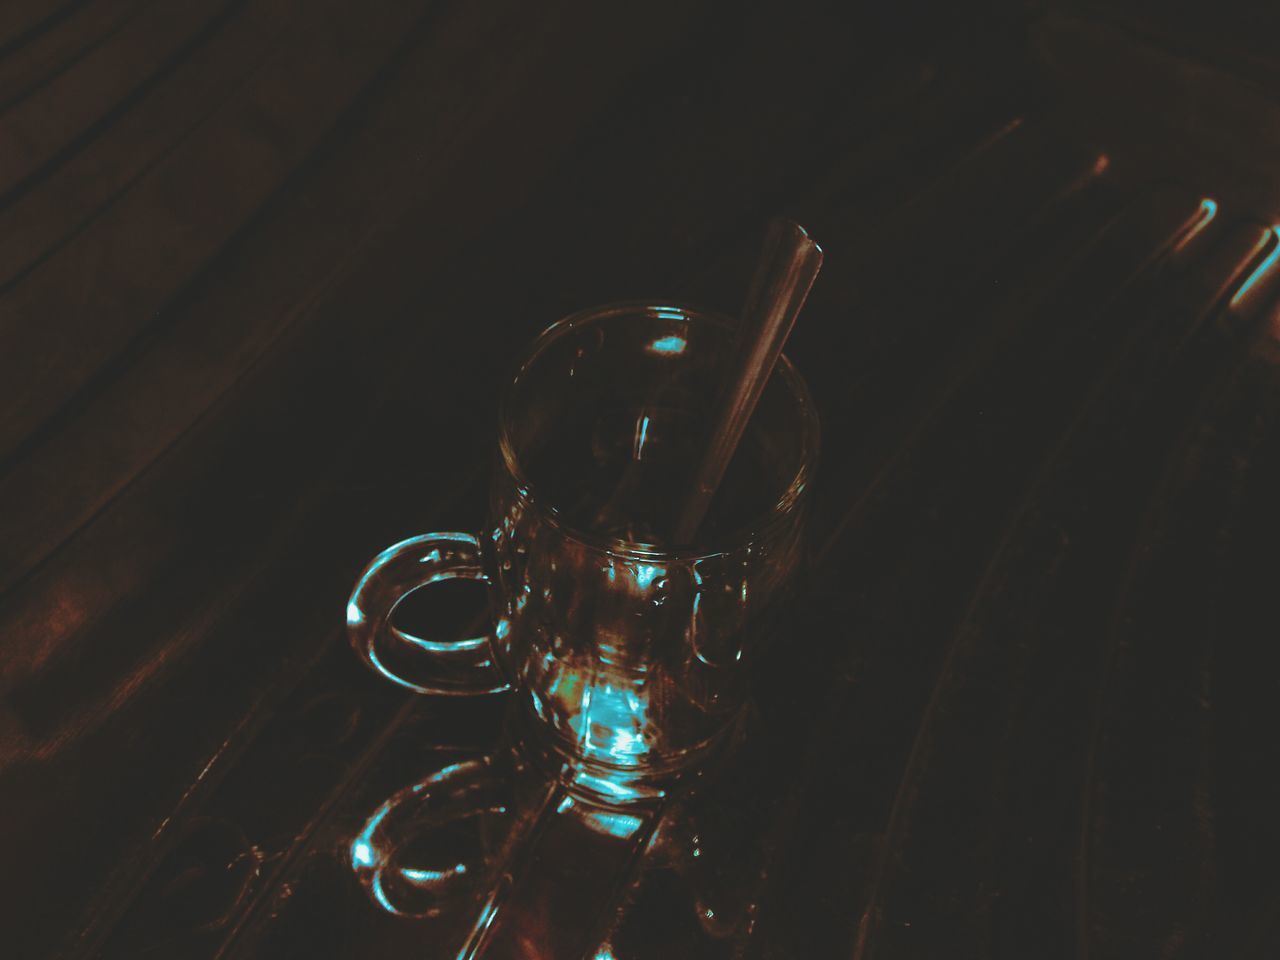 HIGH ANGLE VIEW OF WINE GLASS ON TABLE AT NIGHT